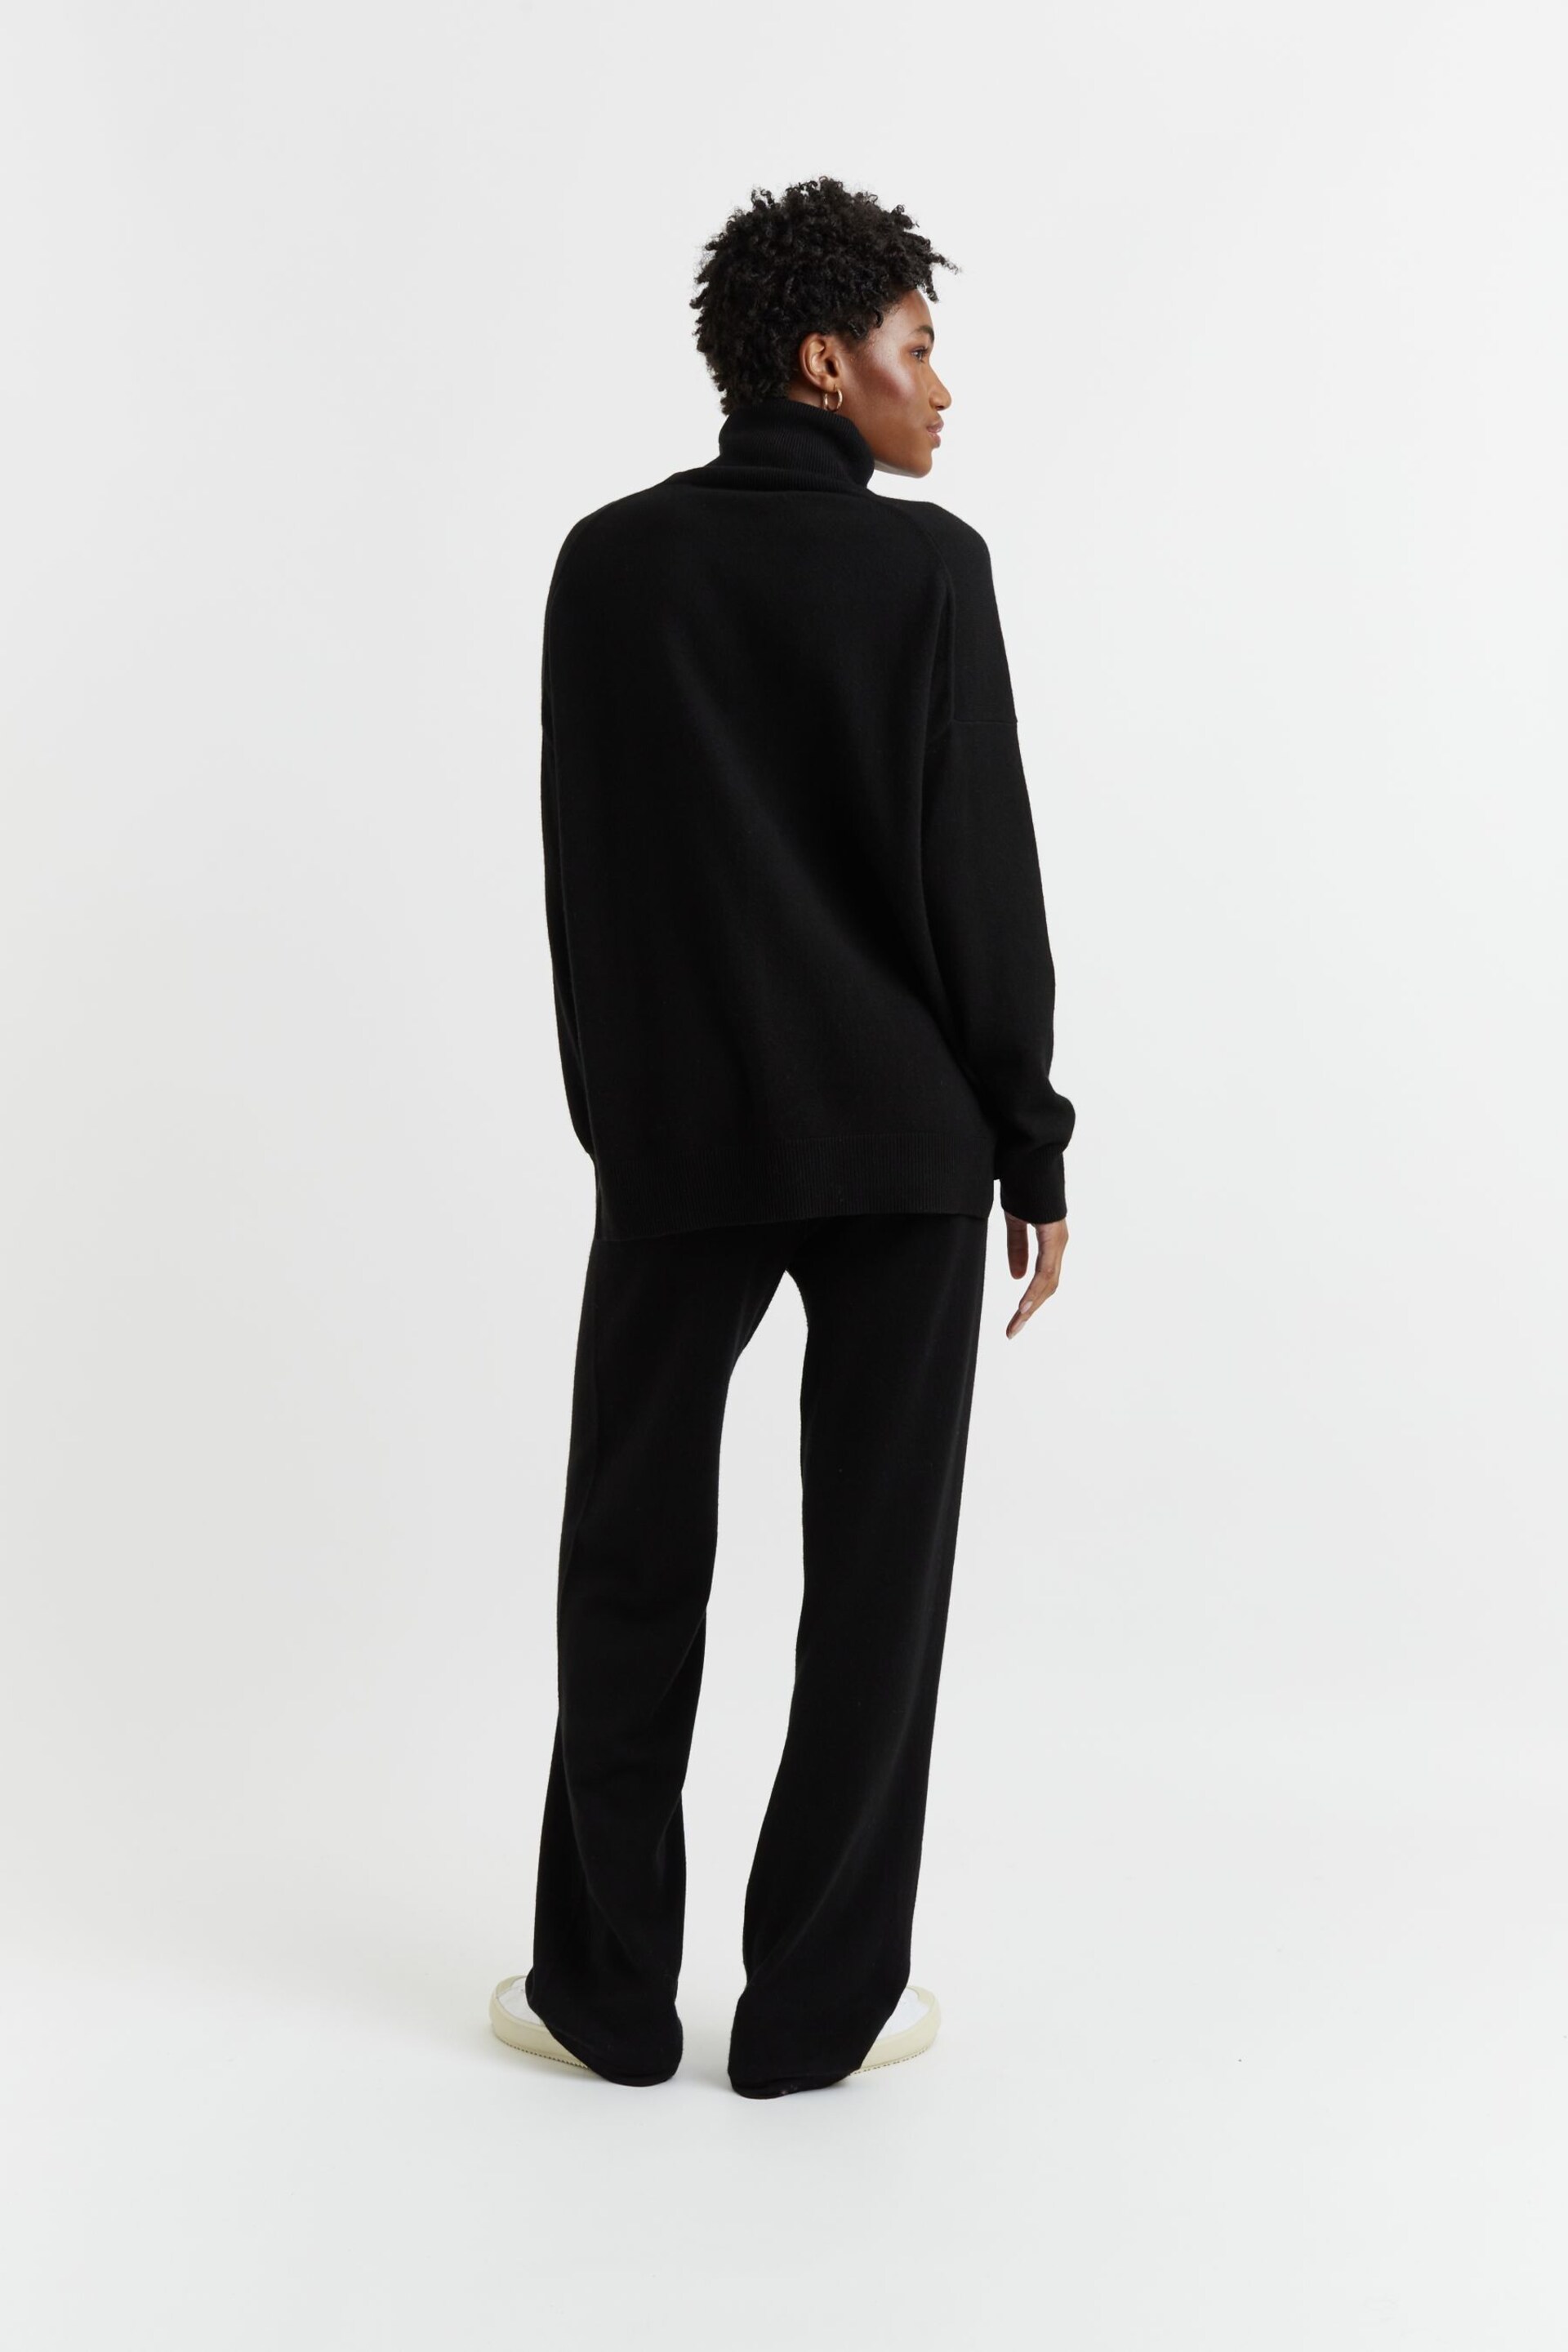 Chinti & Parker Wool/Cashmere Relaxed Roll Neck Jumper - Image 2 of 4